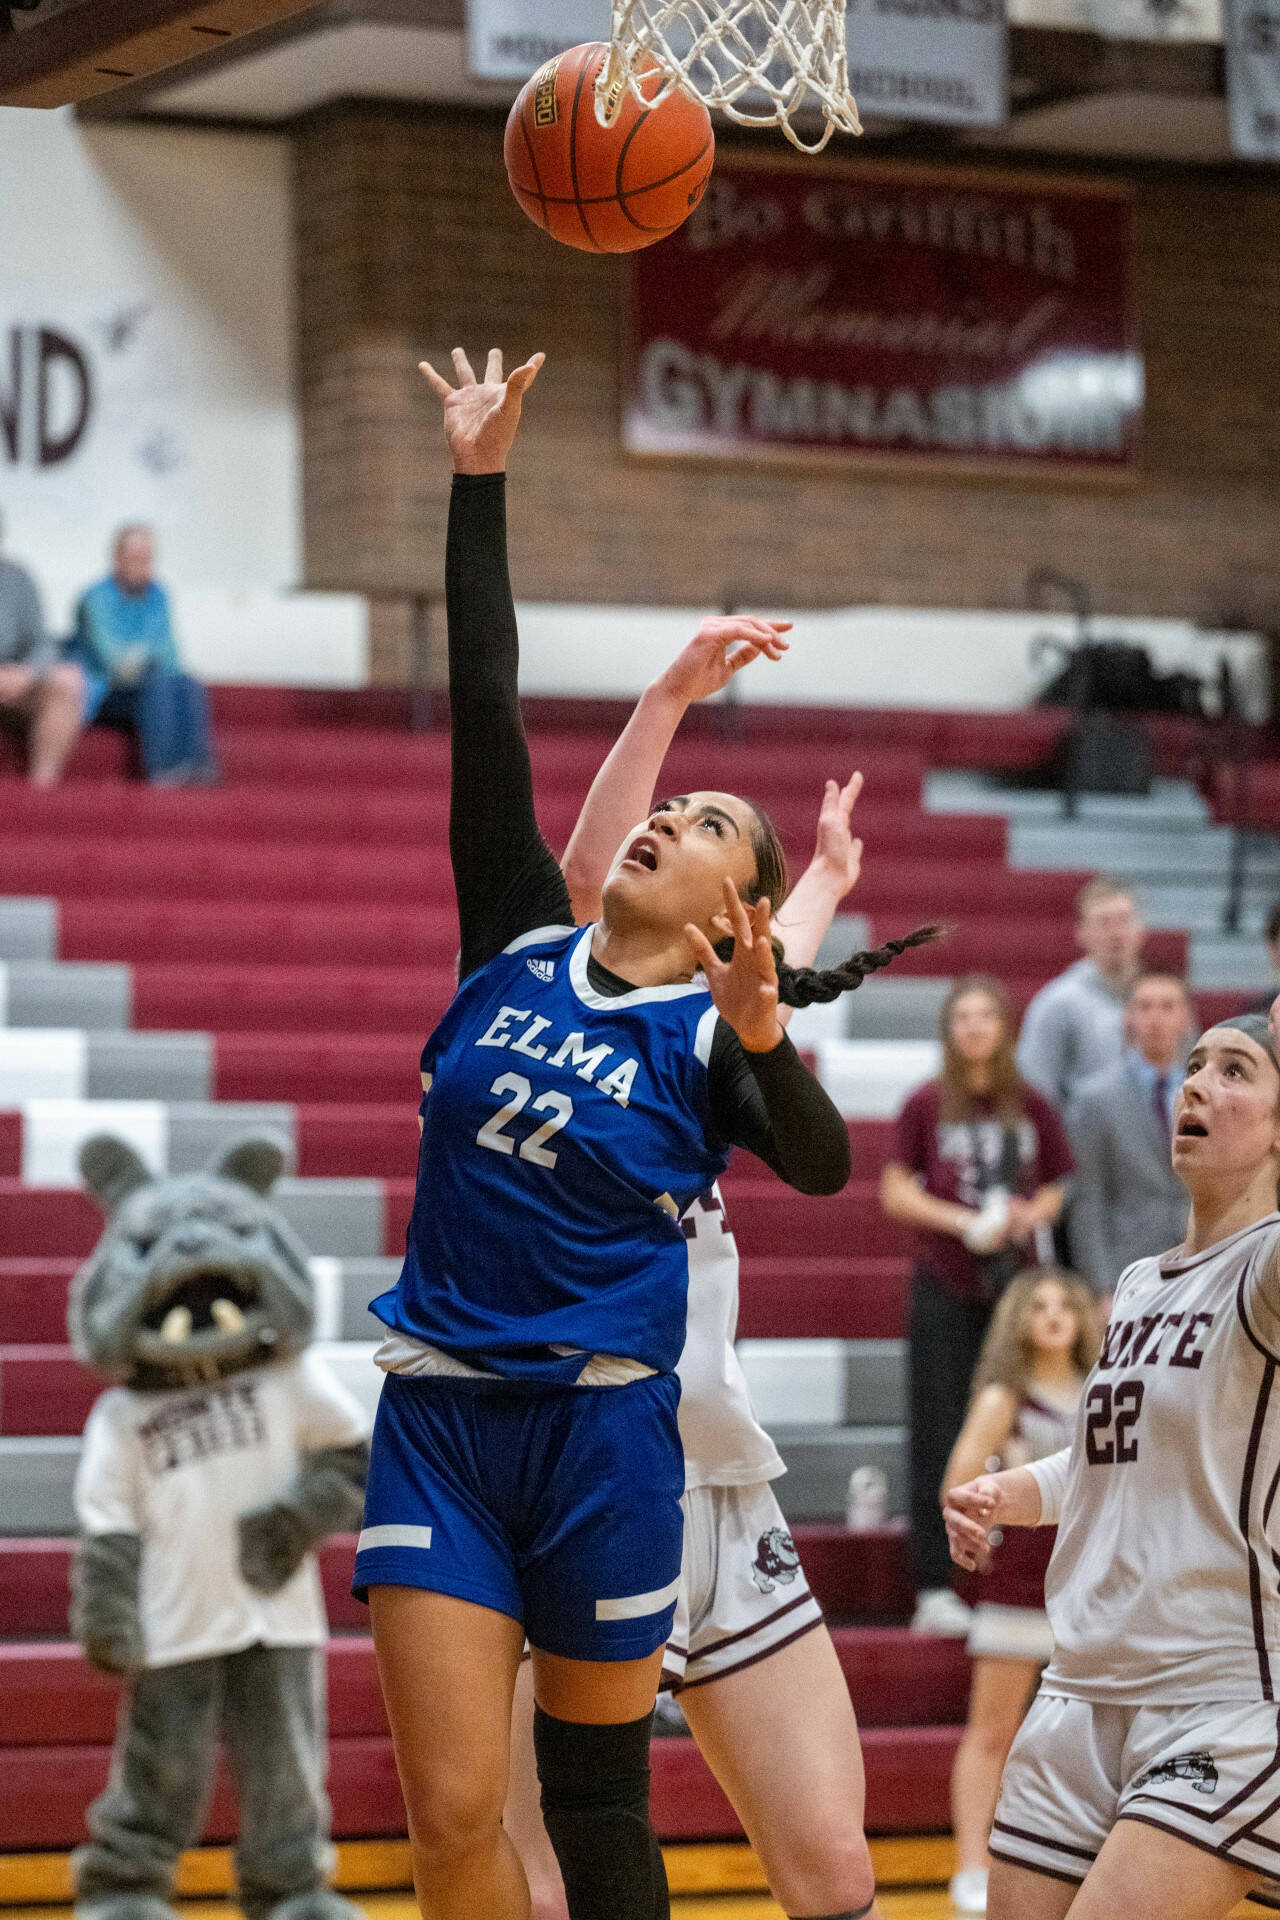 PHOTO BY FOREST WORGUM Elma’s Eliza Sibbett (22) scores on a layup during the Eagles’ 37-22 loss to Montesano in a 1A District 4 semifinal game on Saturday in Montesano.